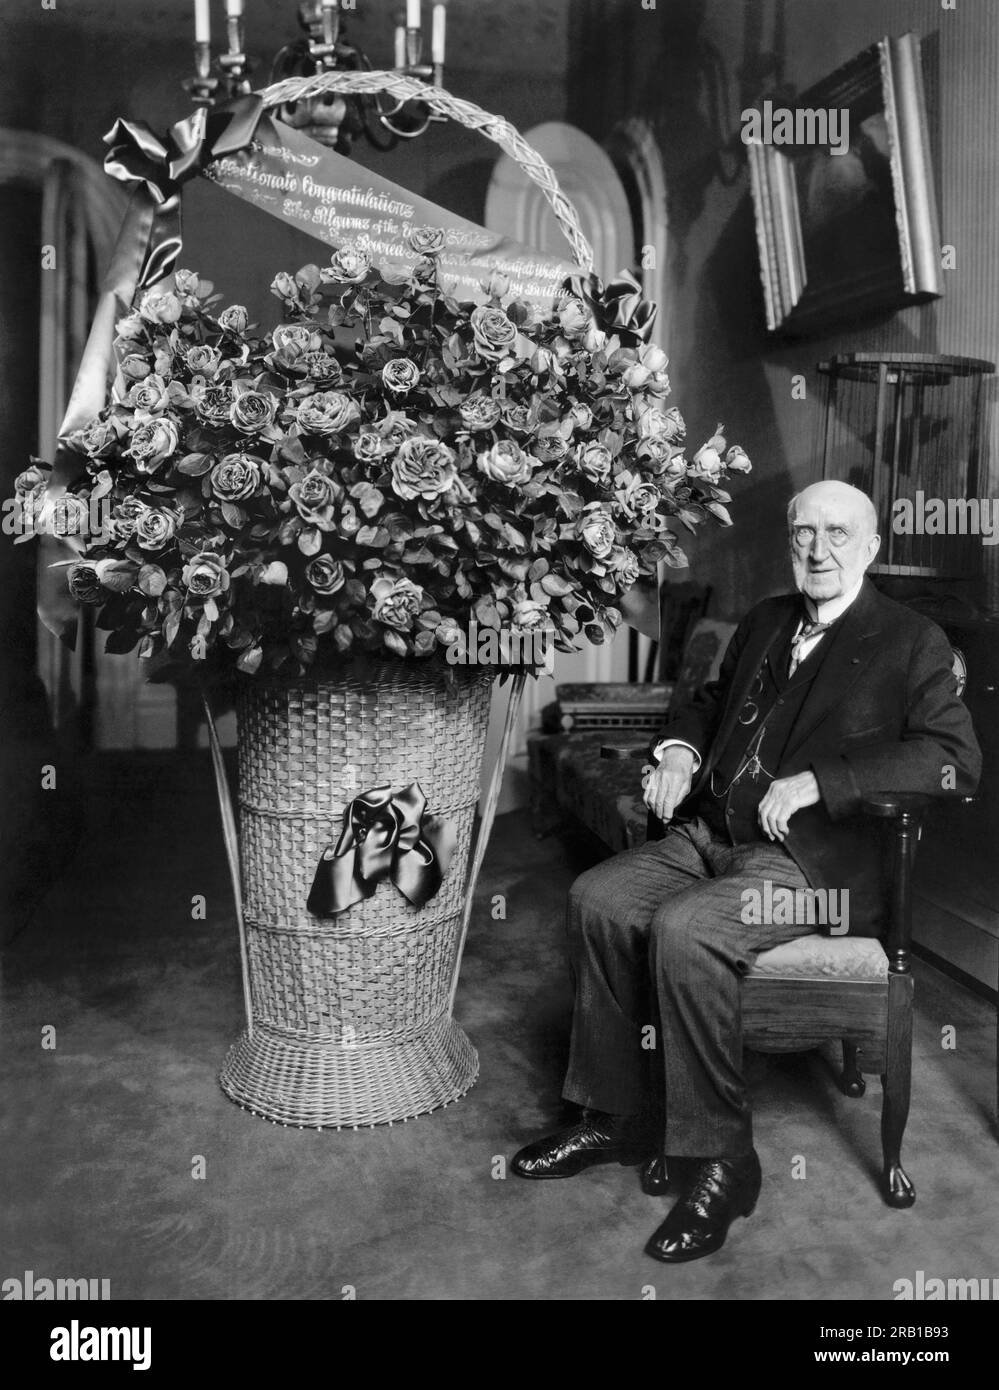 New York, New York:   April 23, 1926 Former Senator and railroad executive Chauncey Depew celebrates his 92nd birthday with a bouquet of flowers from his friends. Stock Photo